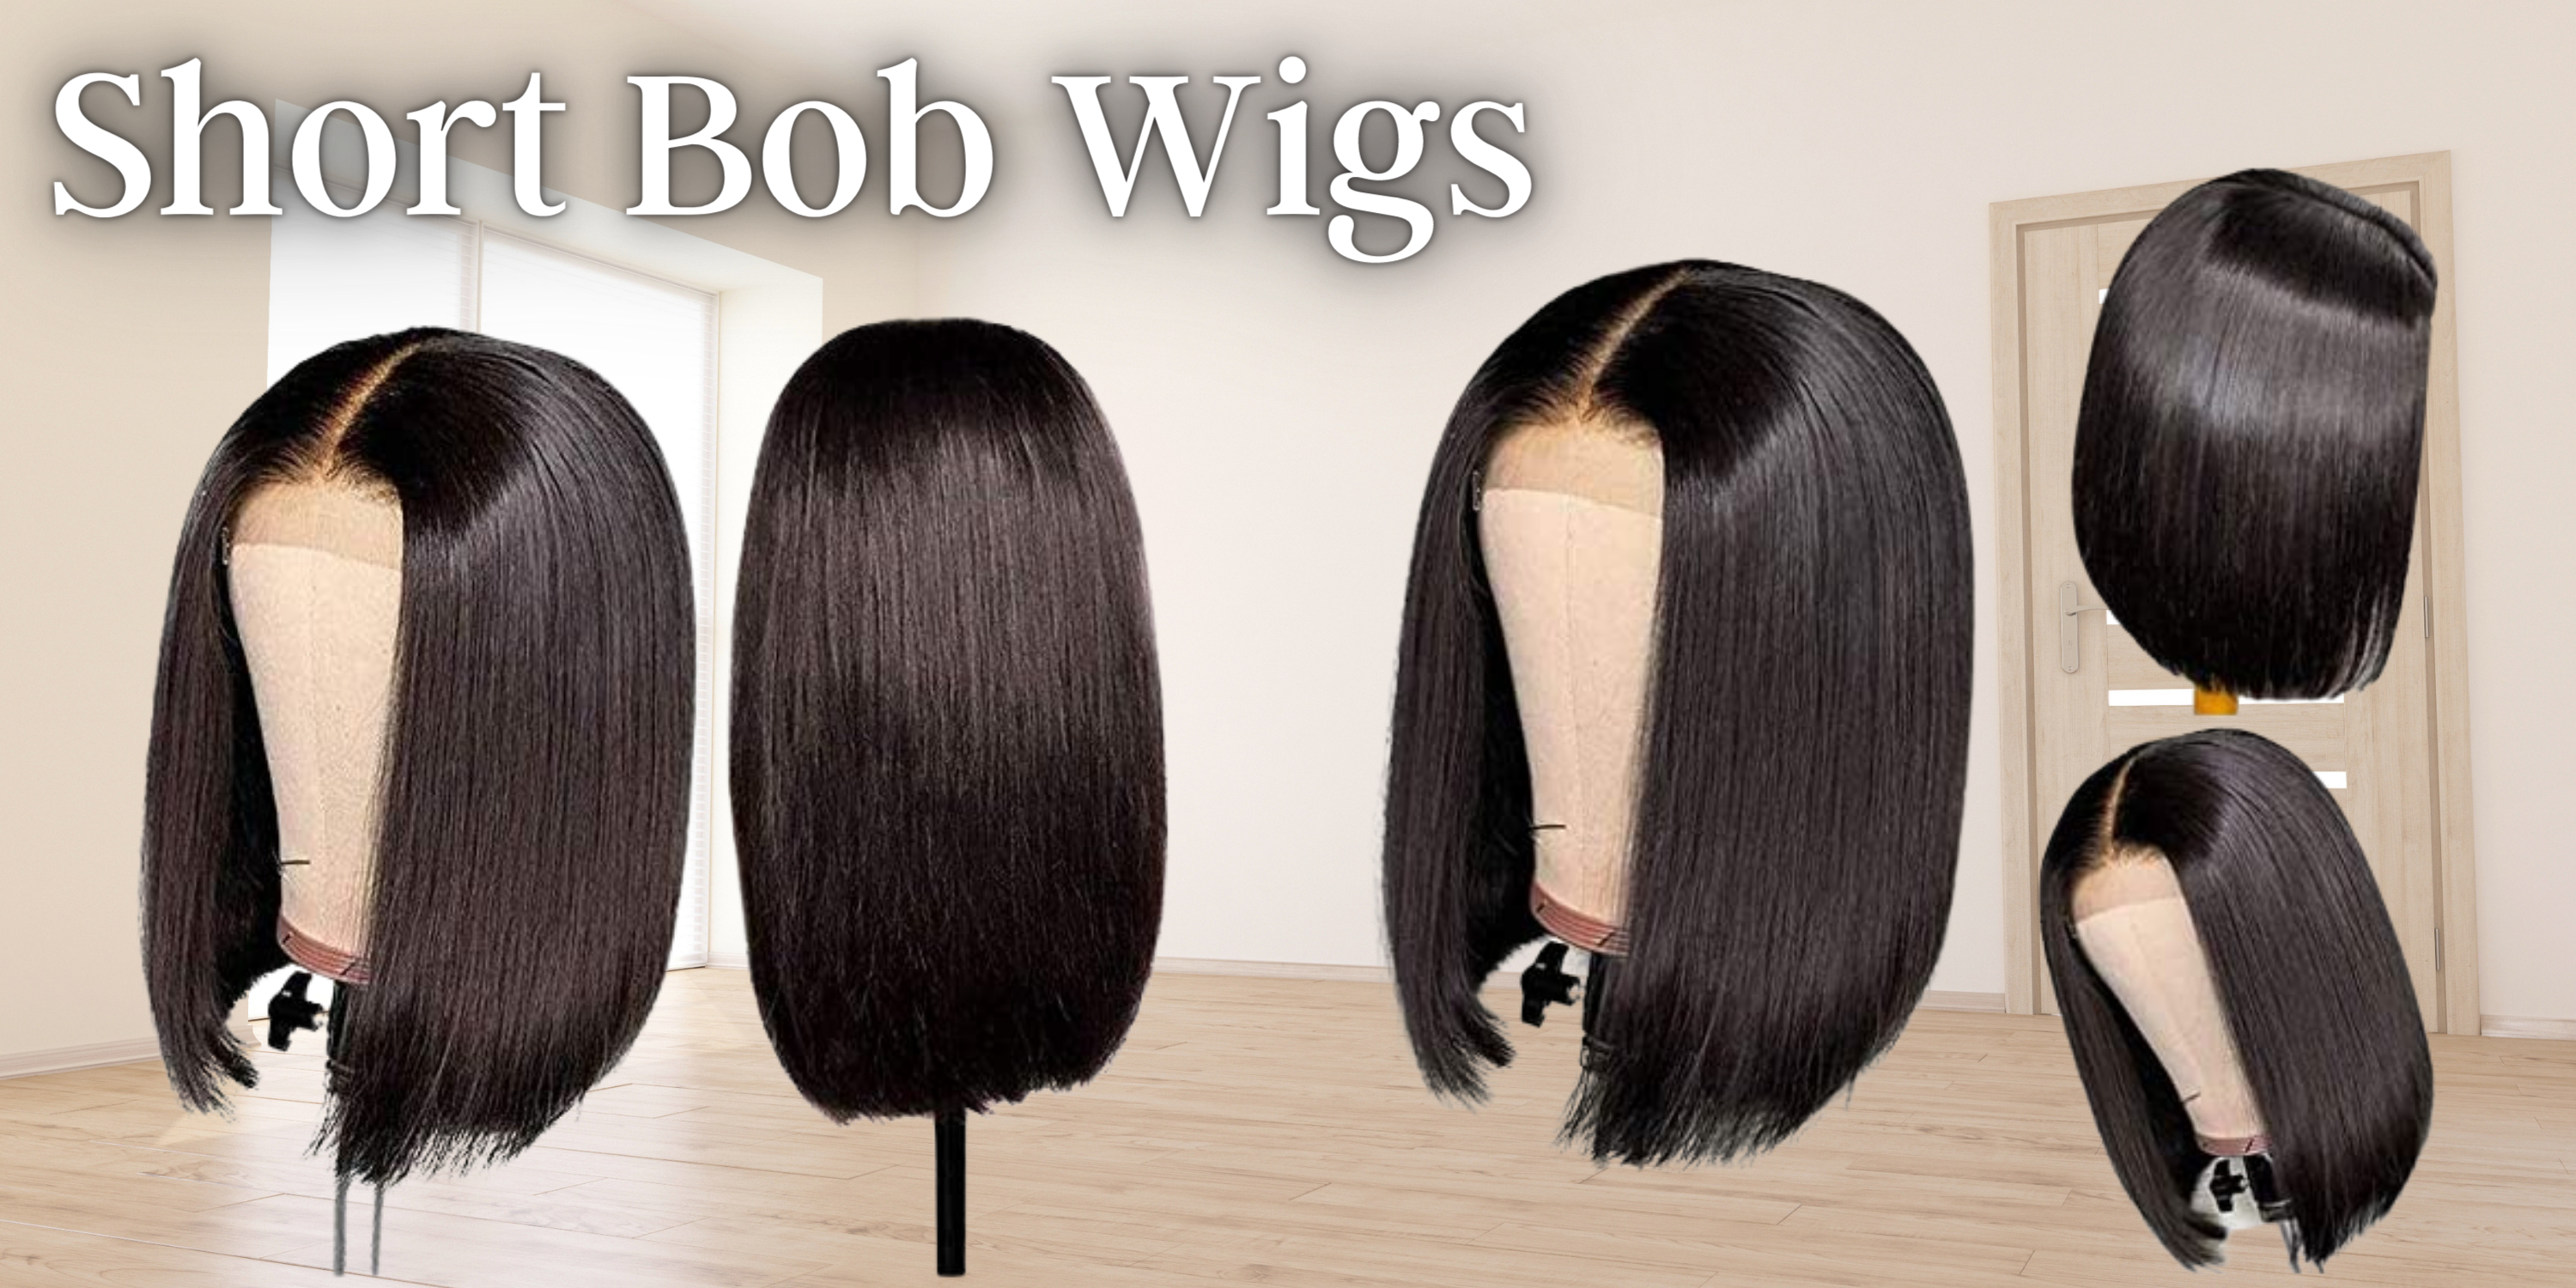 10 Features of Bob Wig That Make Everyone Love It